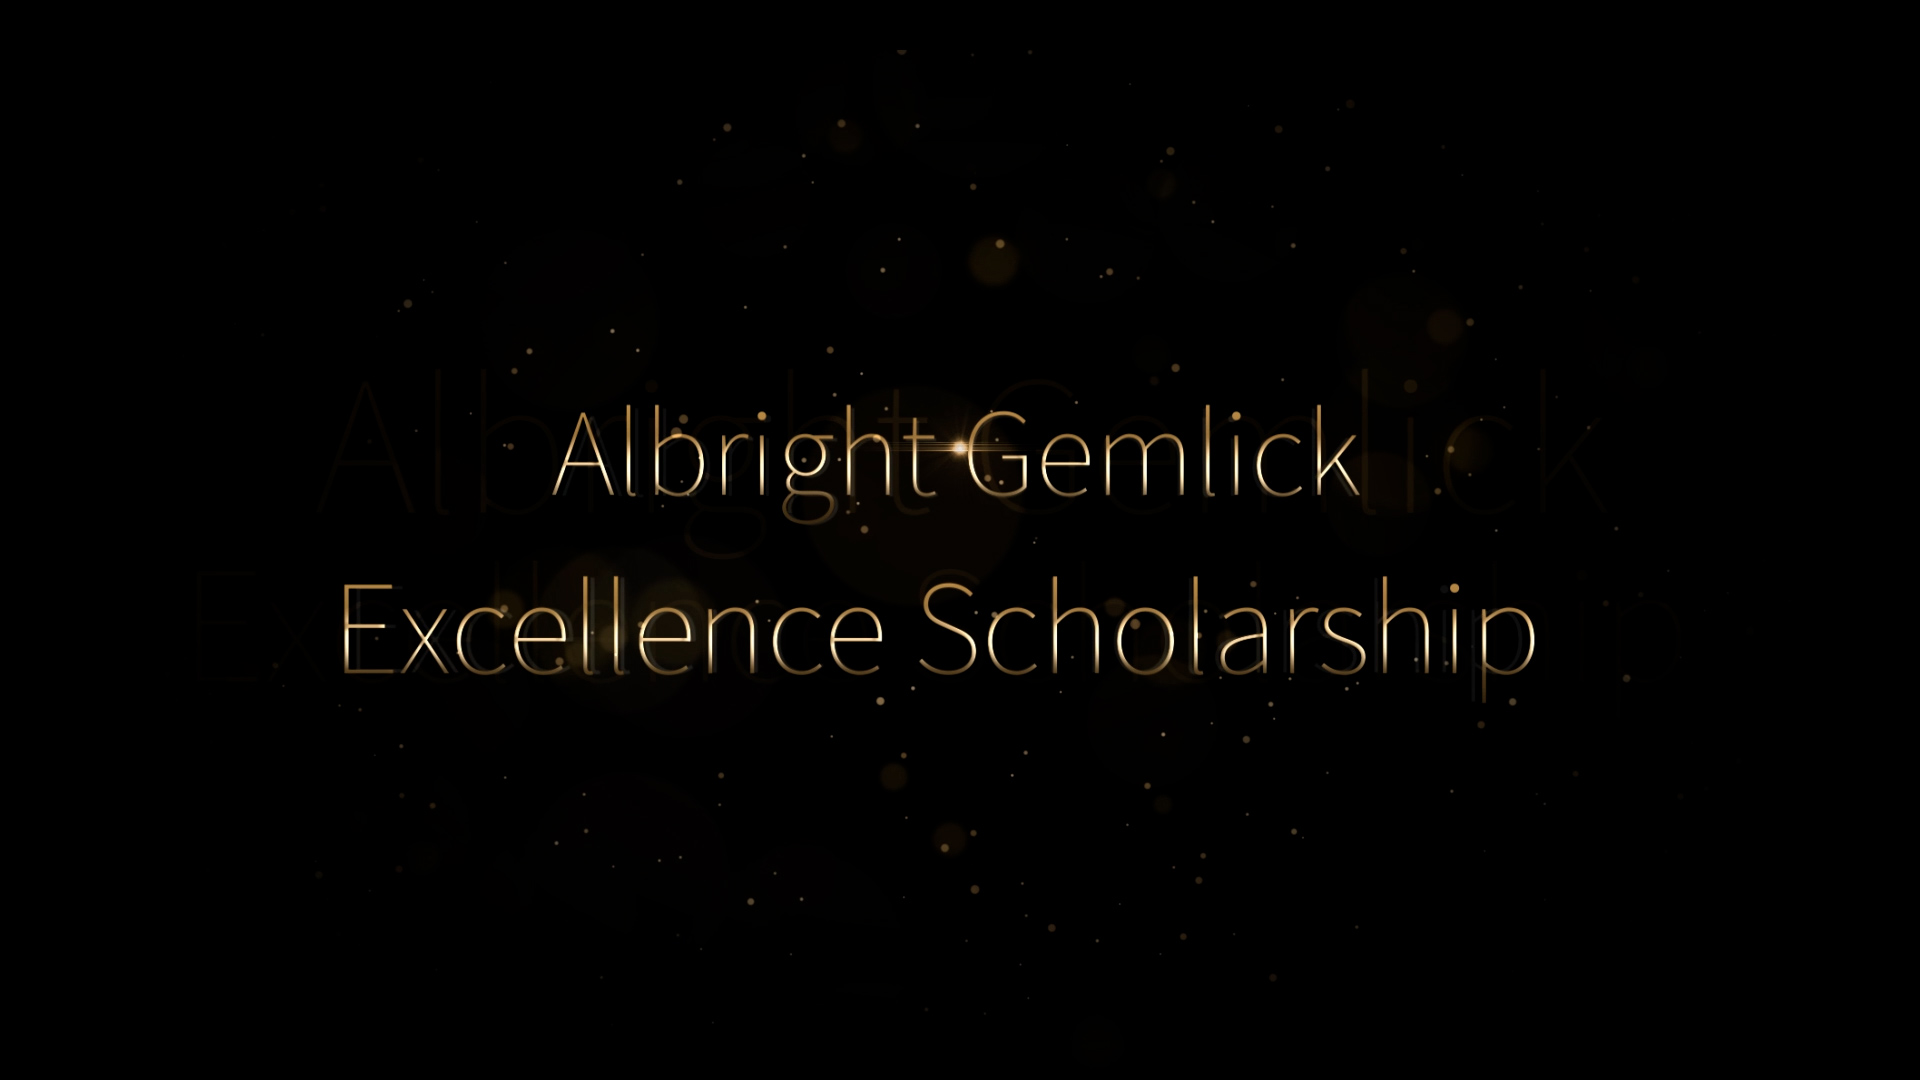 Albright Gemlick Excellence Scholarship